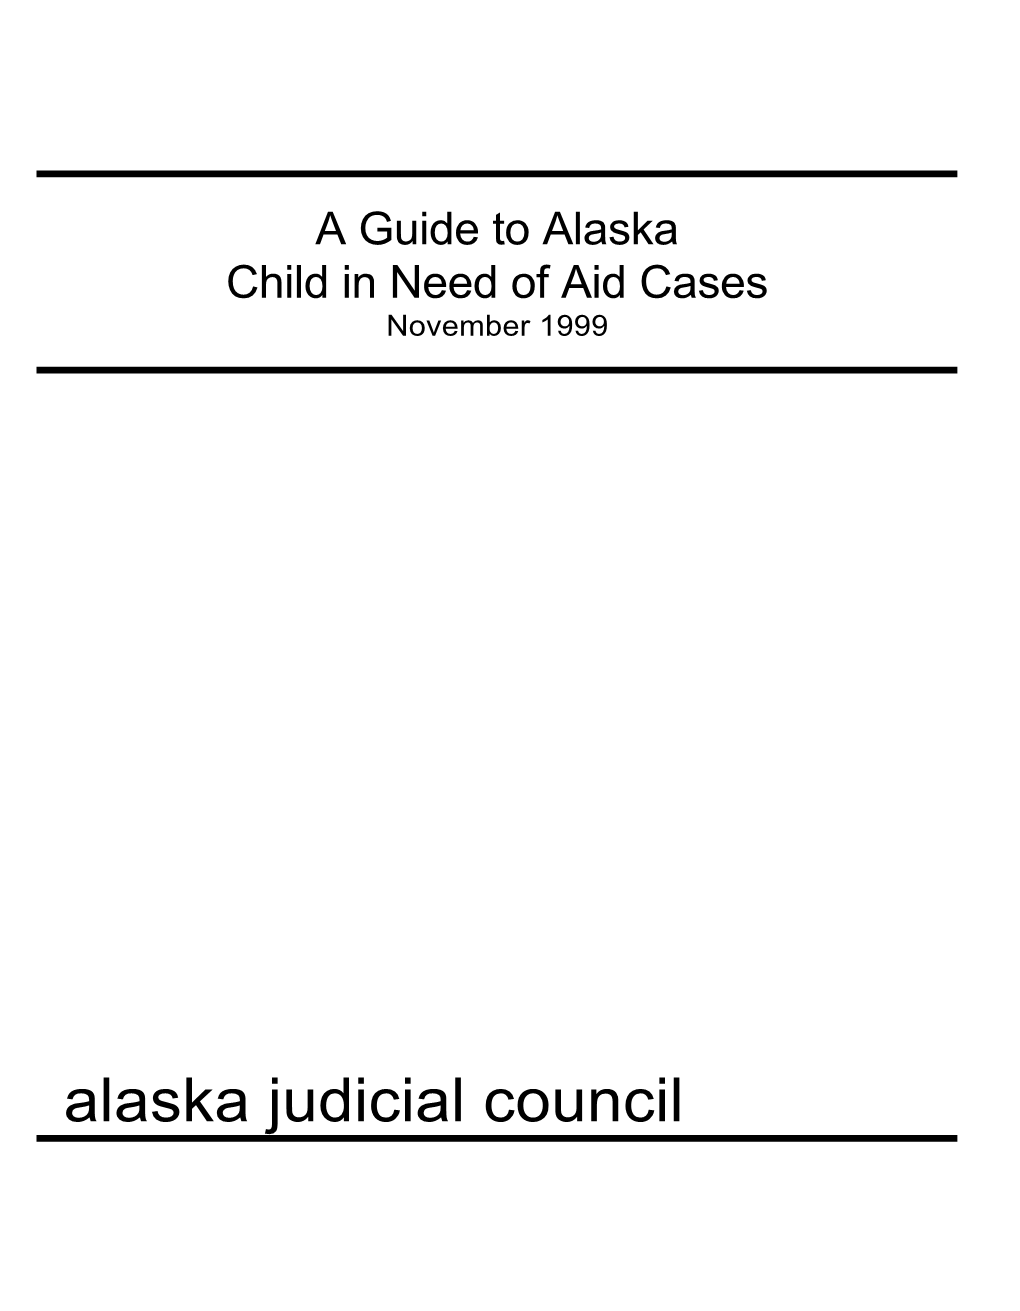 A Guide to Alaska Child in Need of Aid Cases November 1999